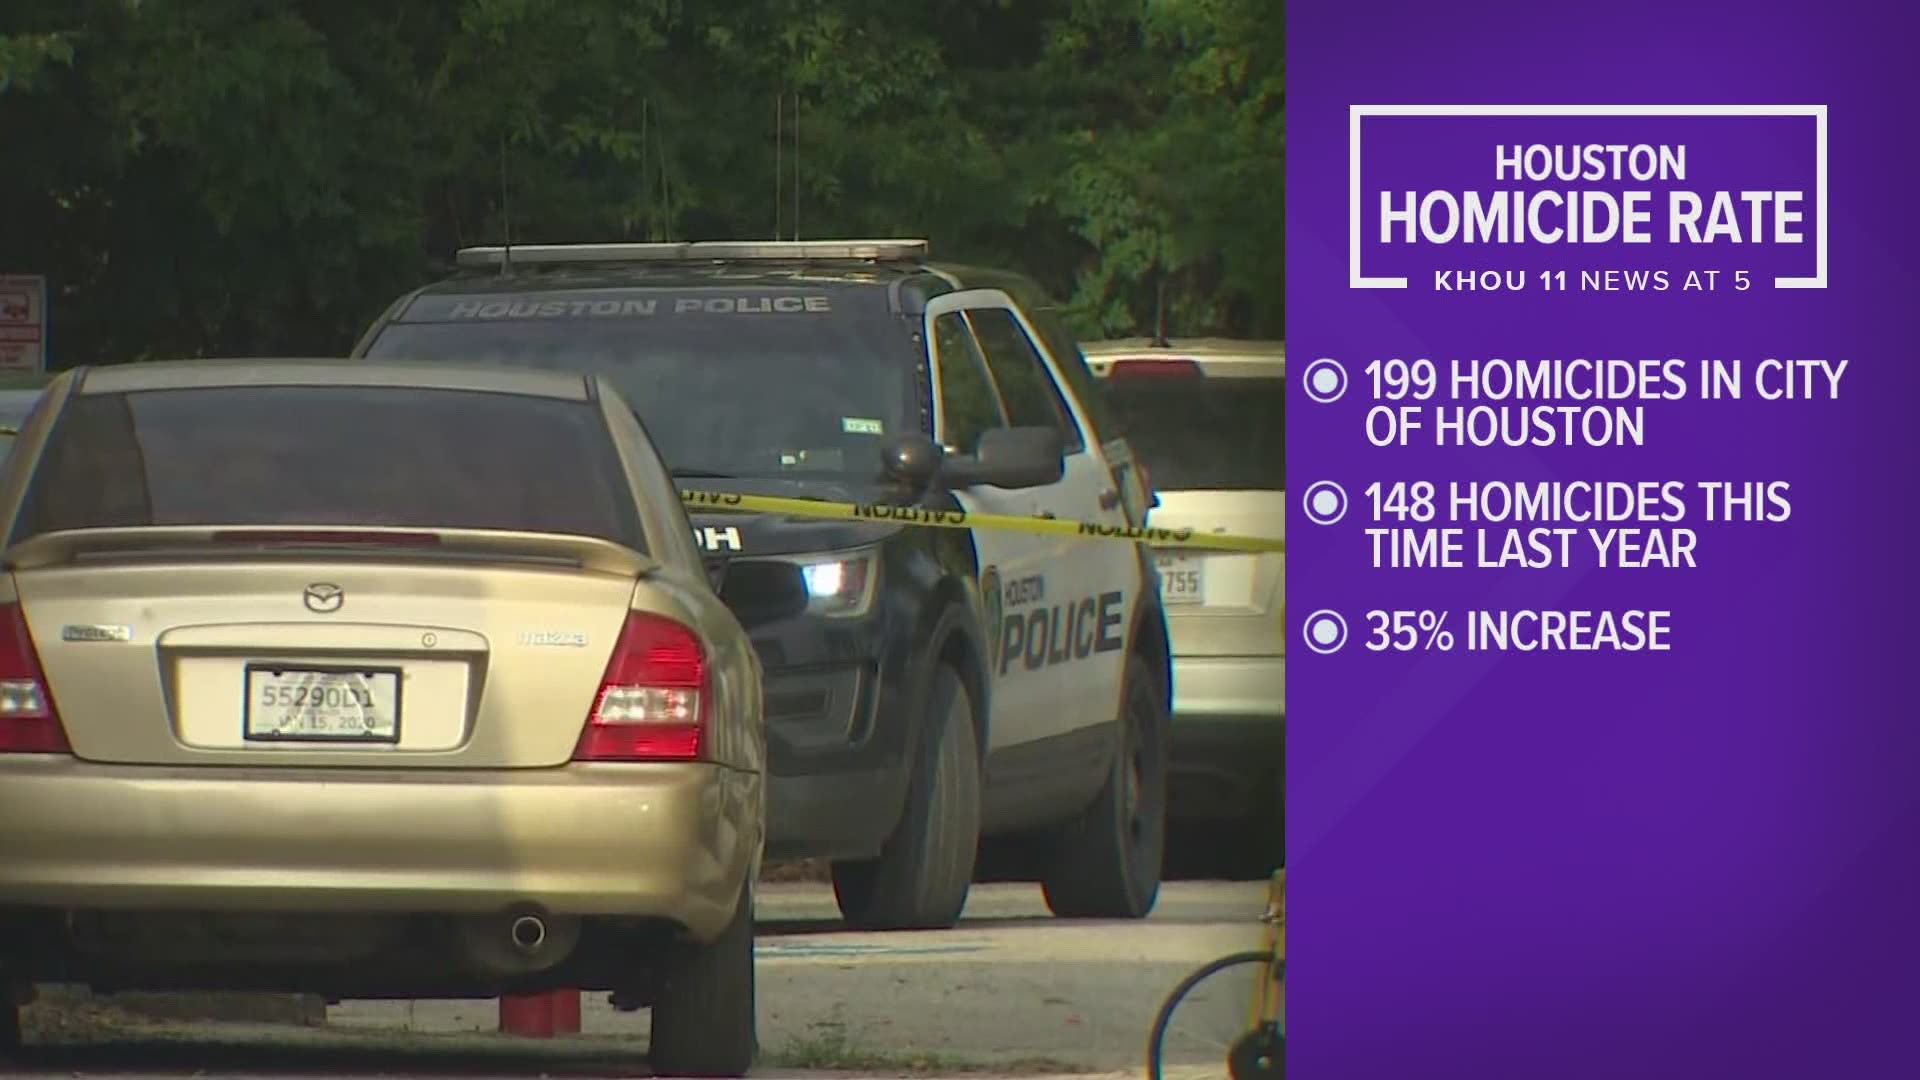 While homicide numbers are rising within Houston city limits, the Harris County Sheriff's Office said it has investigated fewer murders this year than last year.